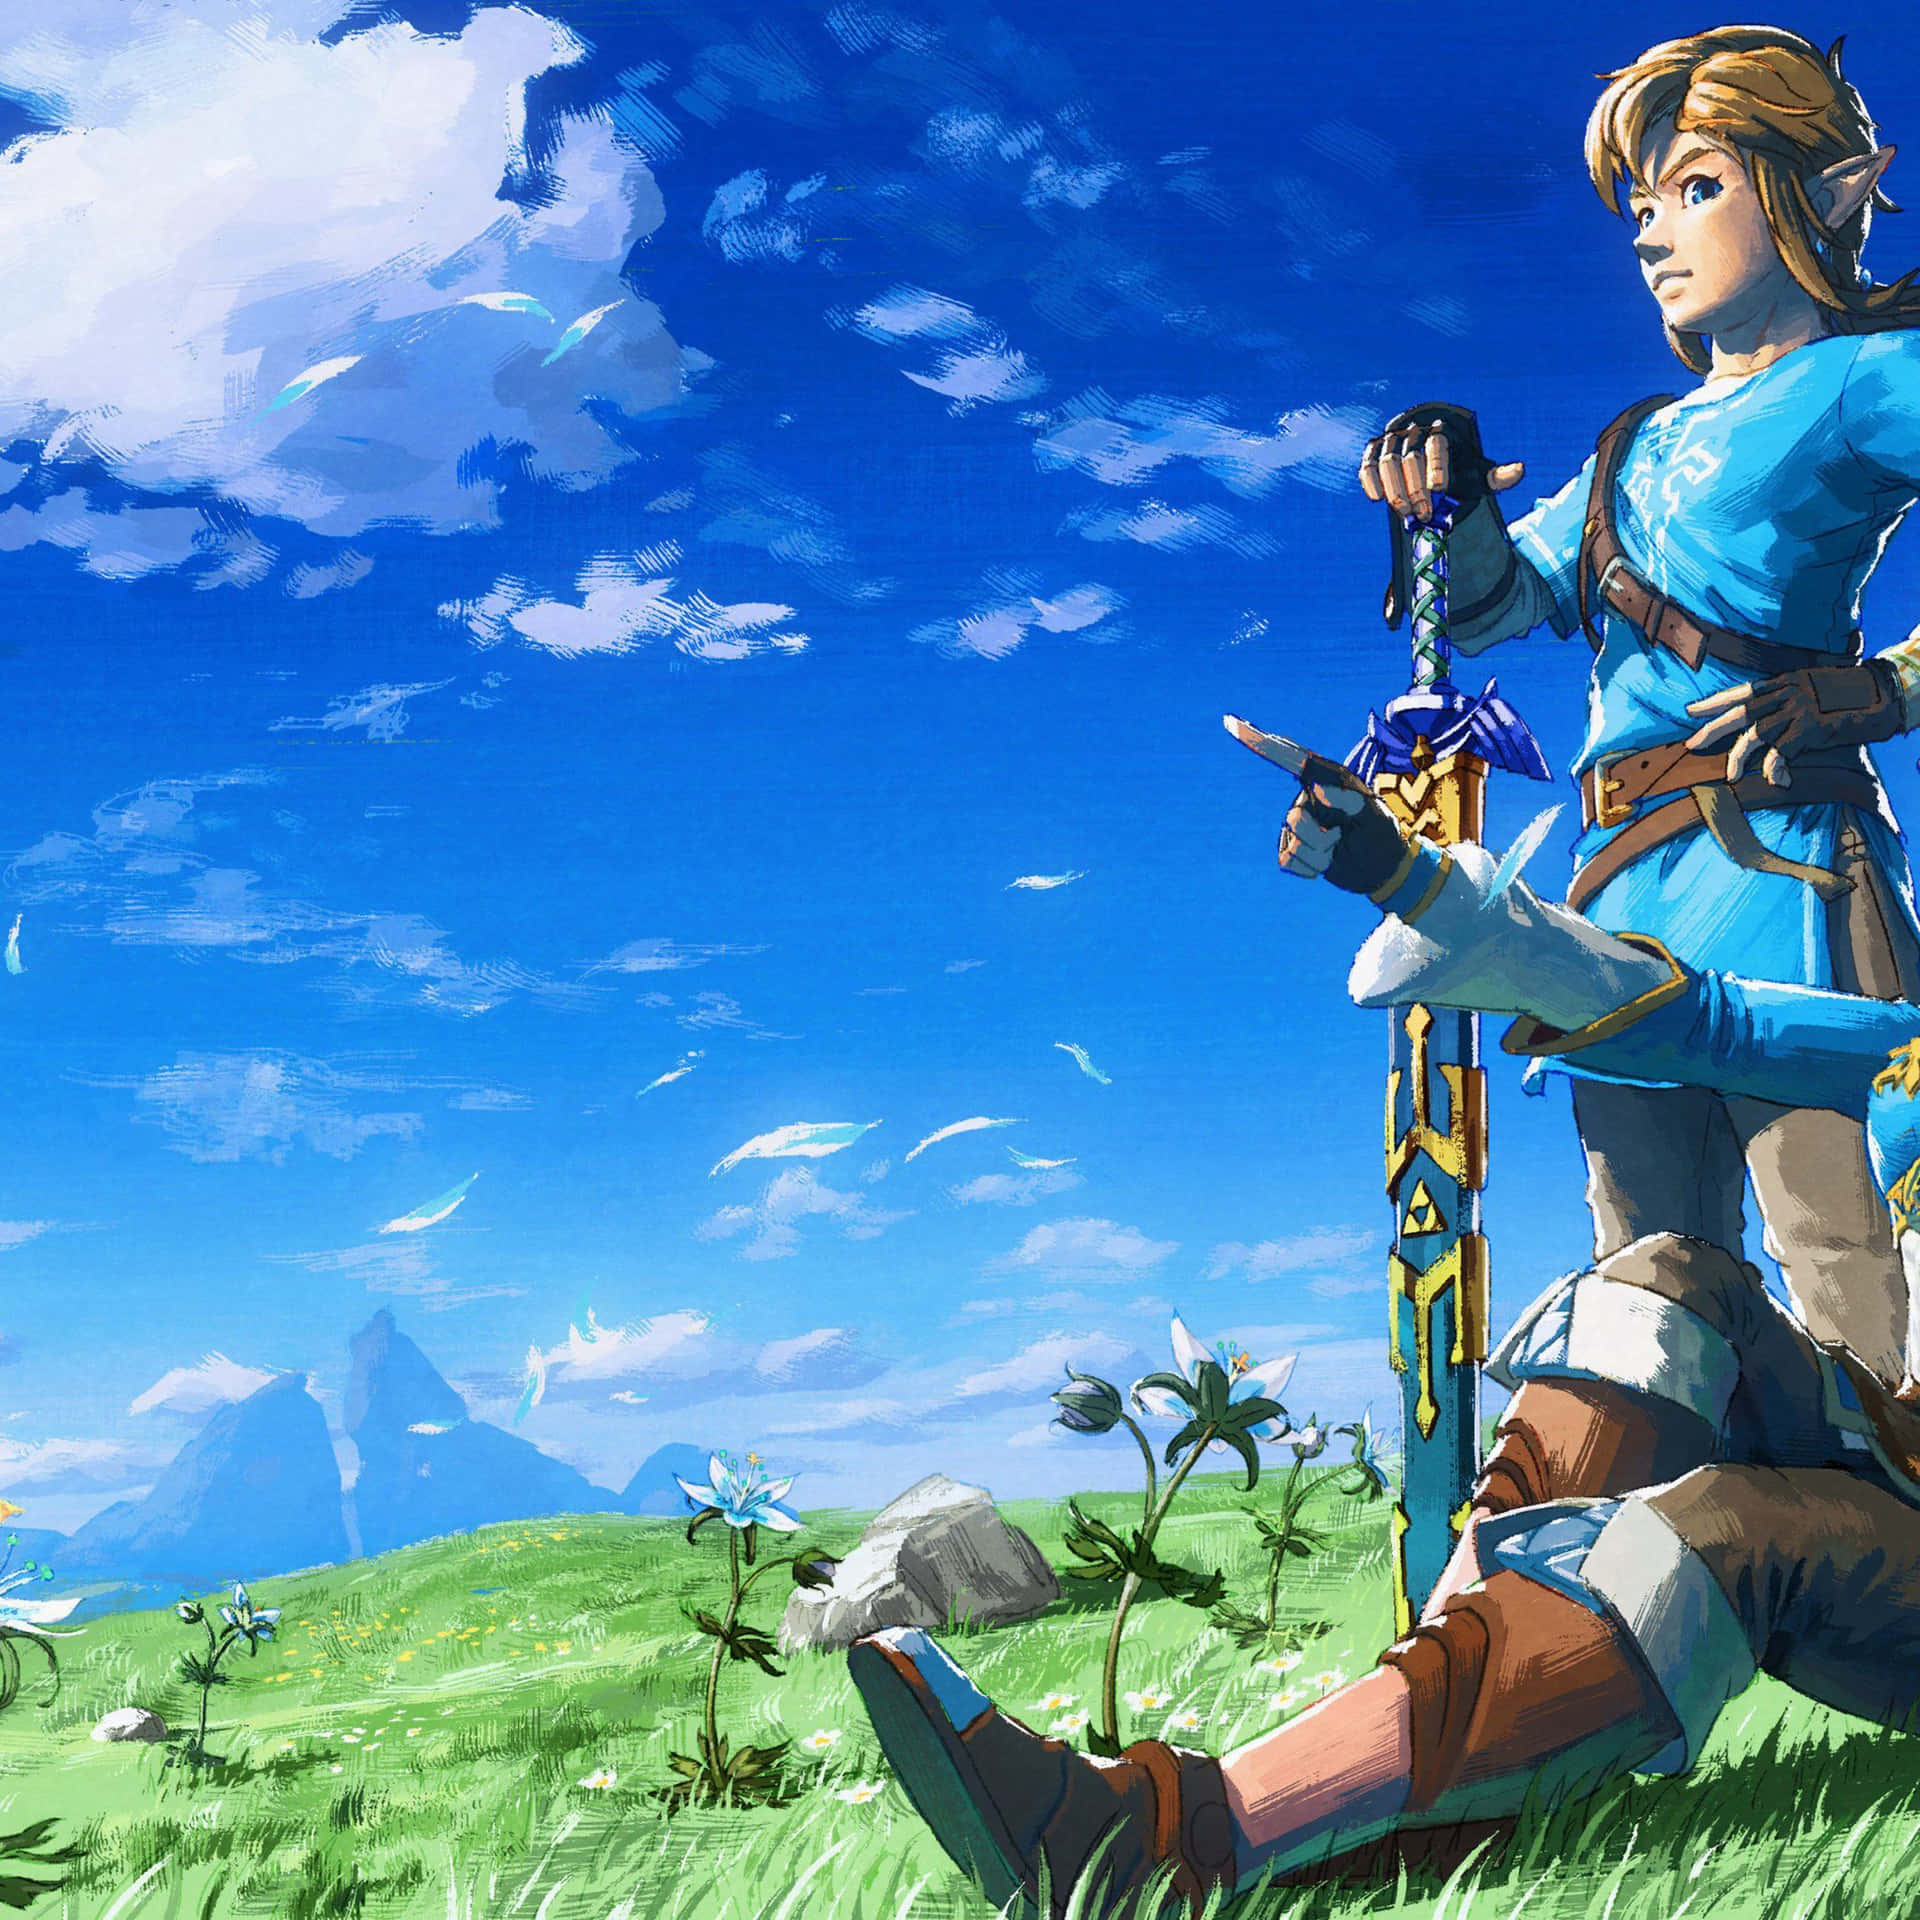 Experience the Trailblazing Adventure with "Zelda: Breath of the Wild" in 4K Wallpaper